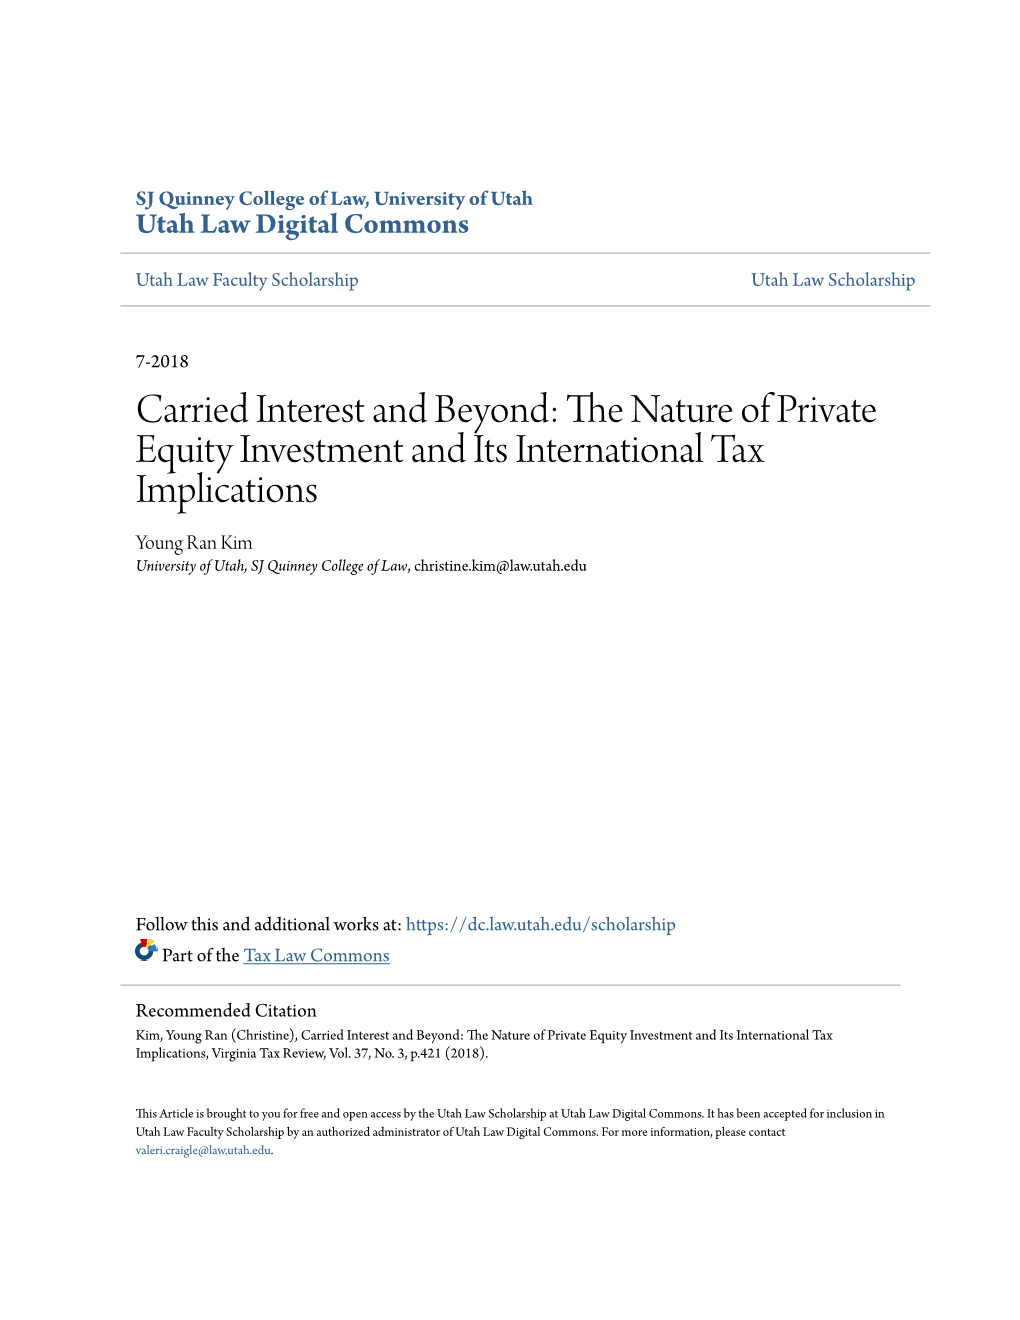 Carried Interest and Beyond: the Nature of Private Equity Investment and Its International Tax Implications